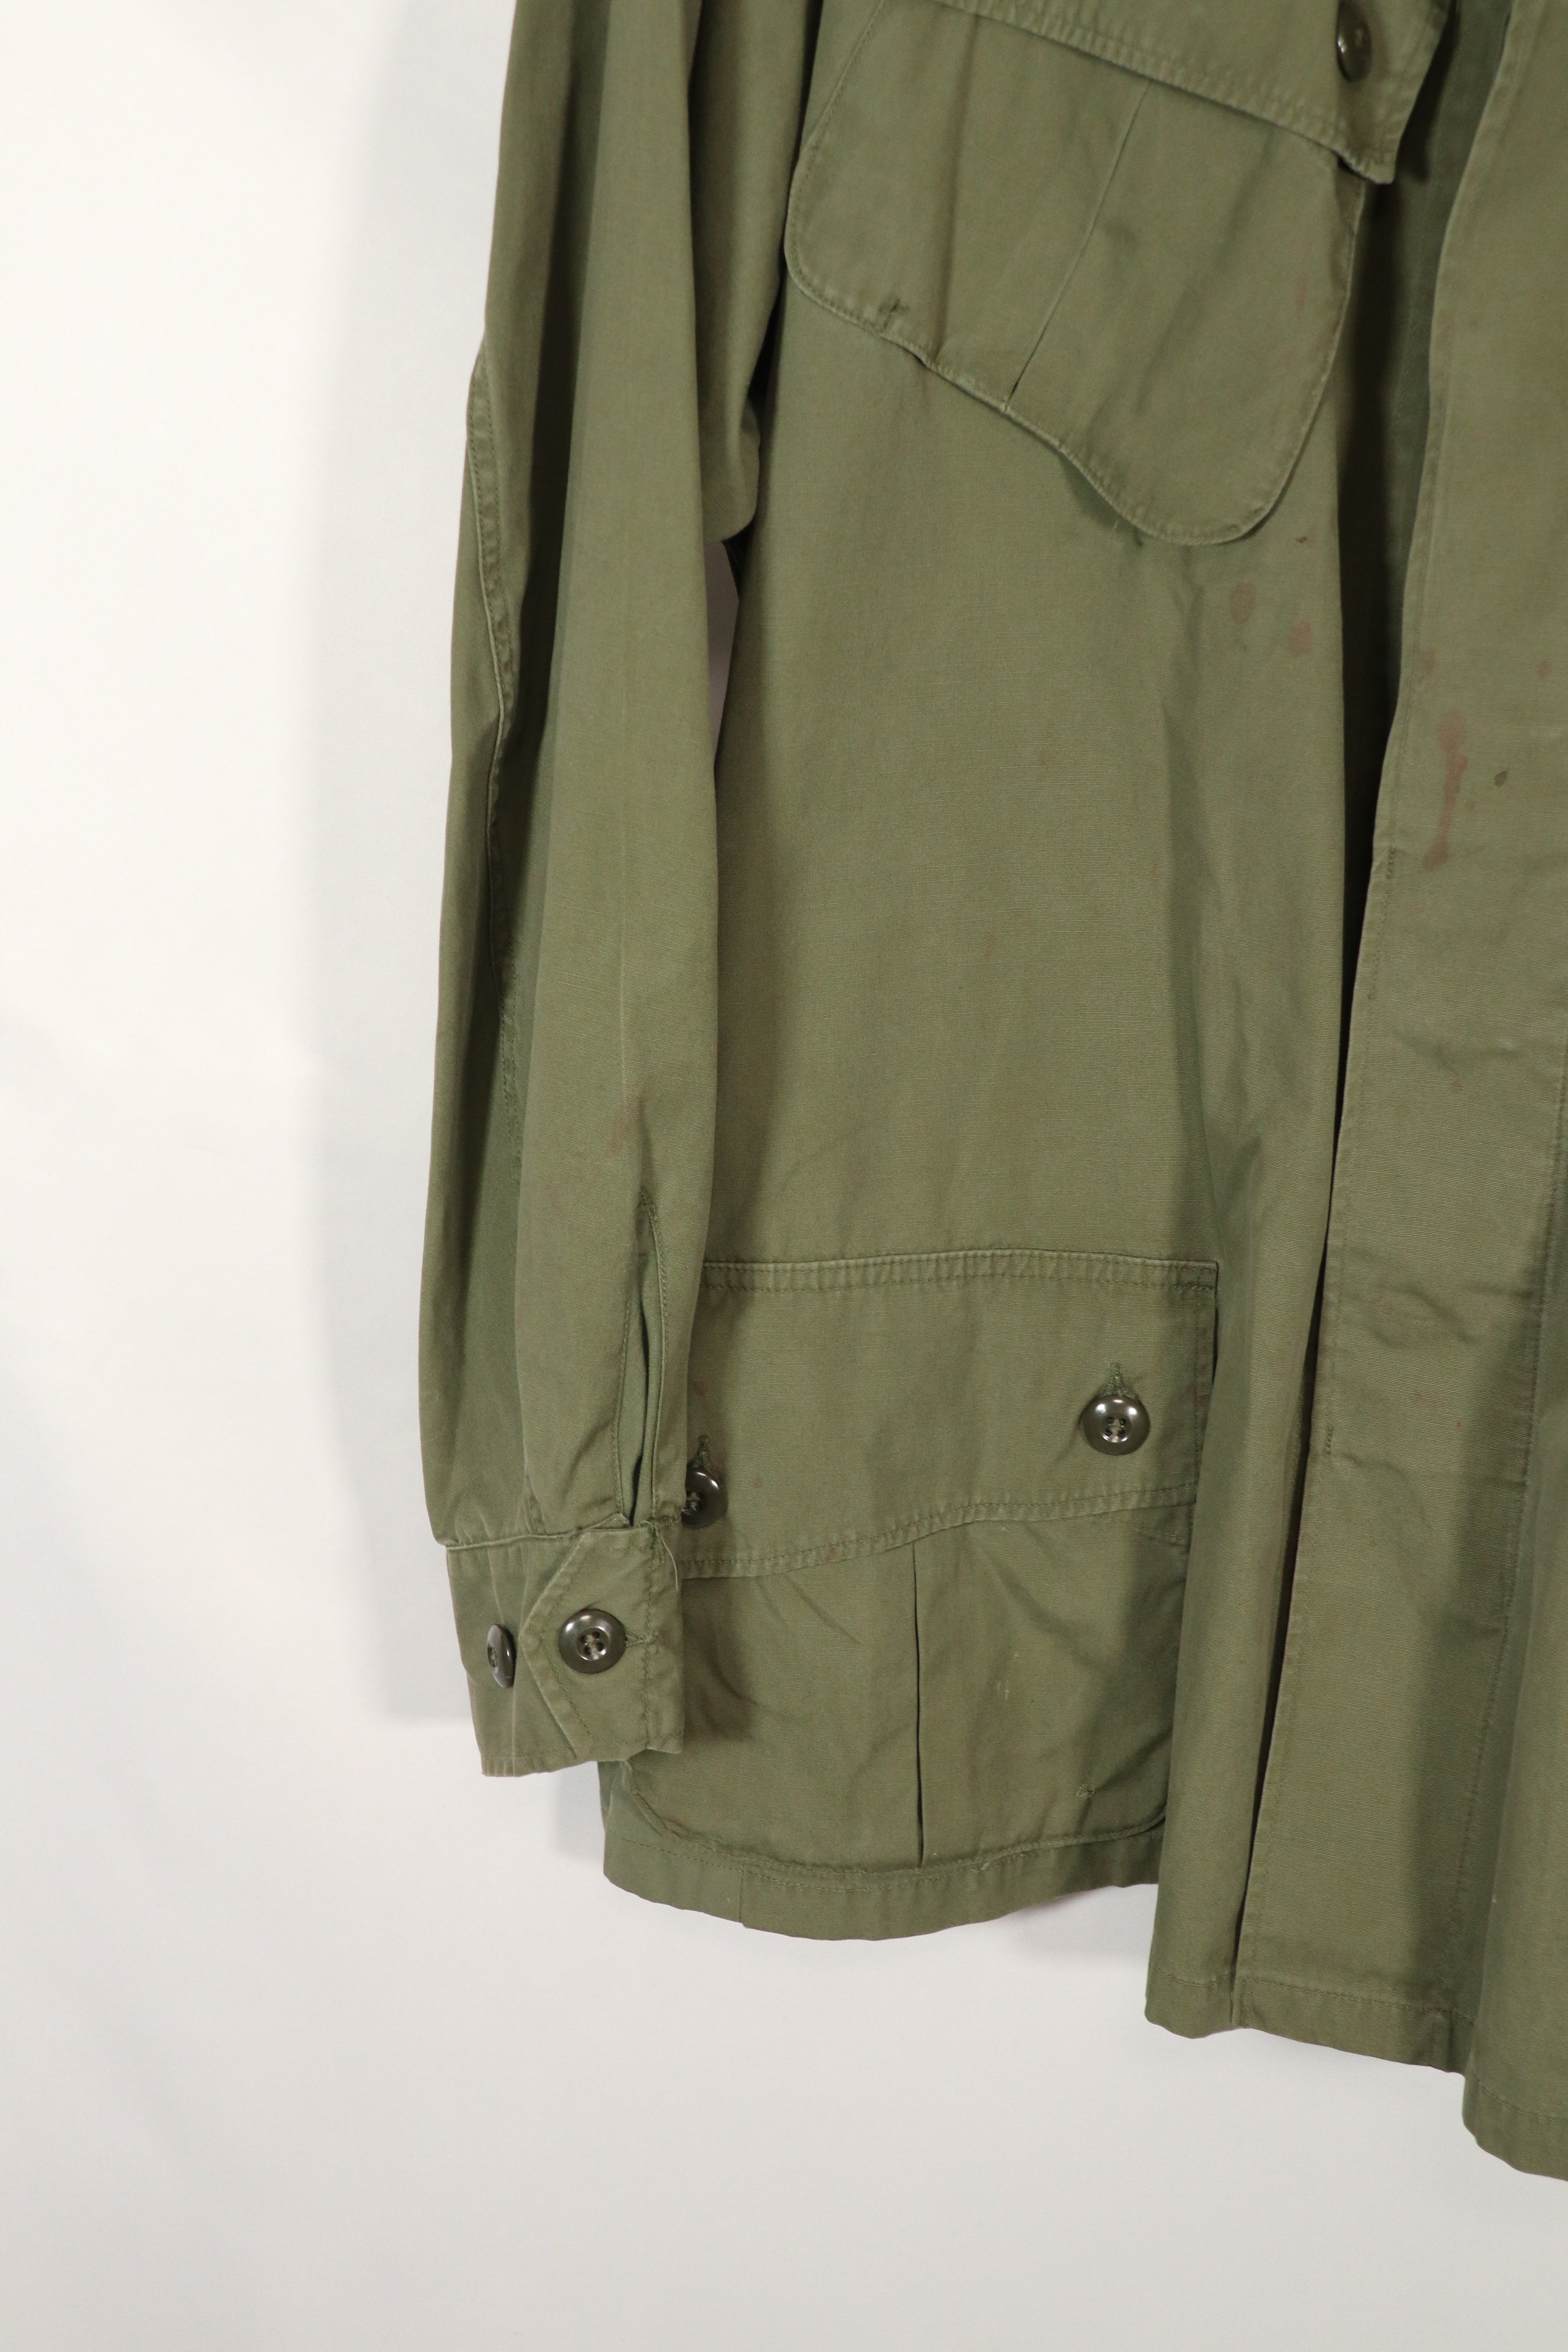 Real 1st Model Jungle Fatigue Jacket, repaired, Big size, used.